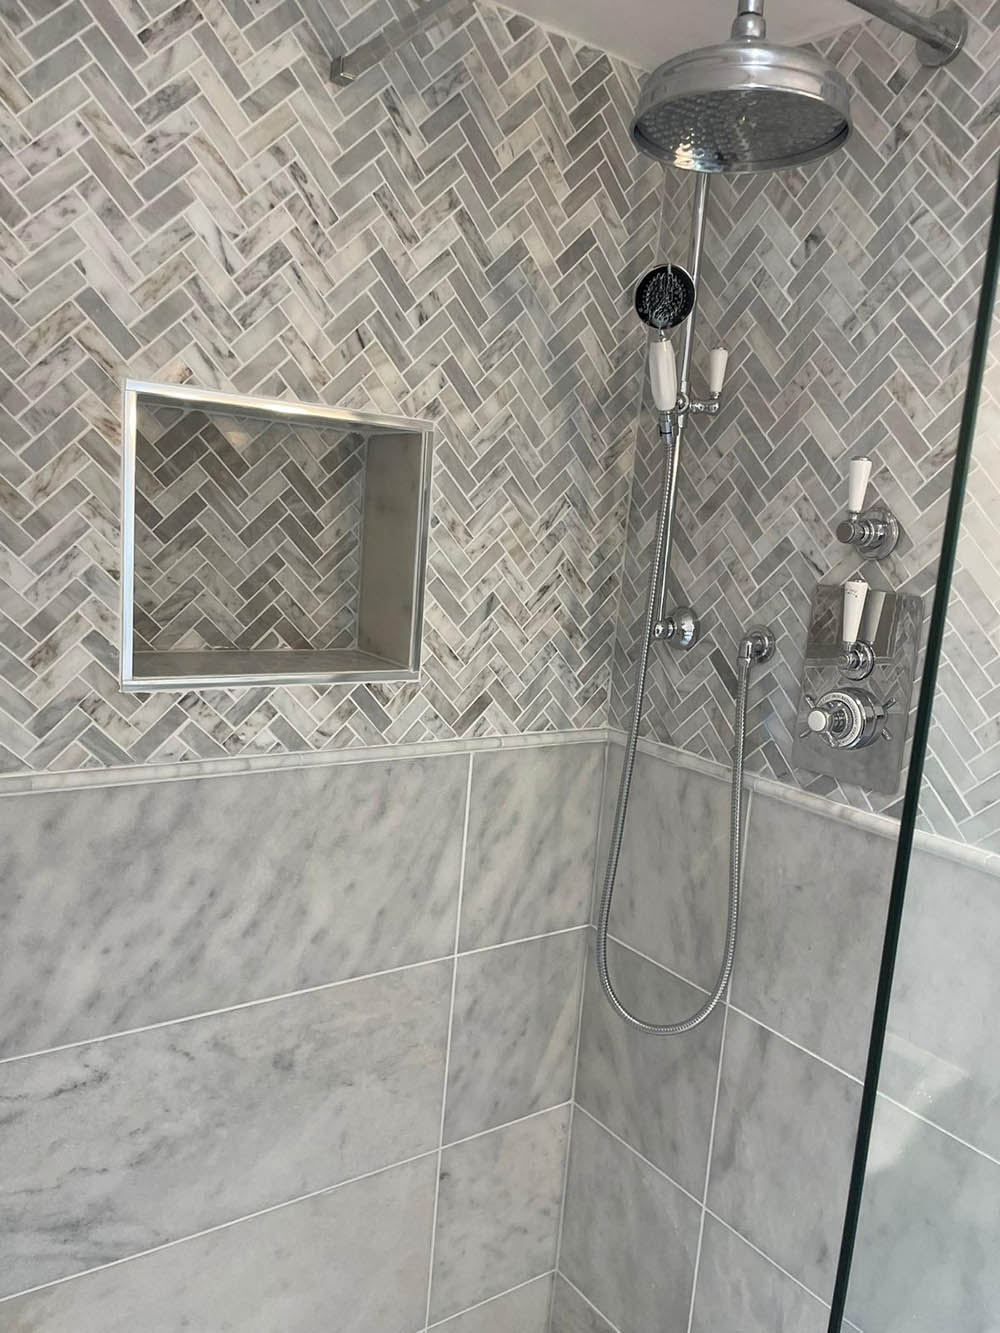 Tiled wall of a shower